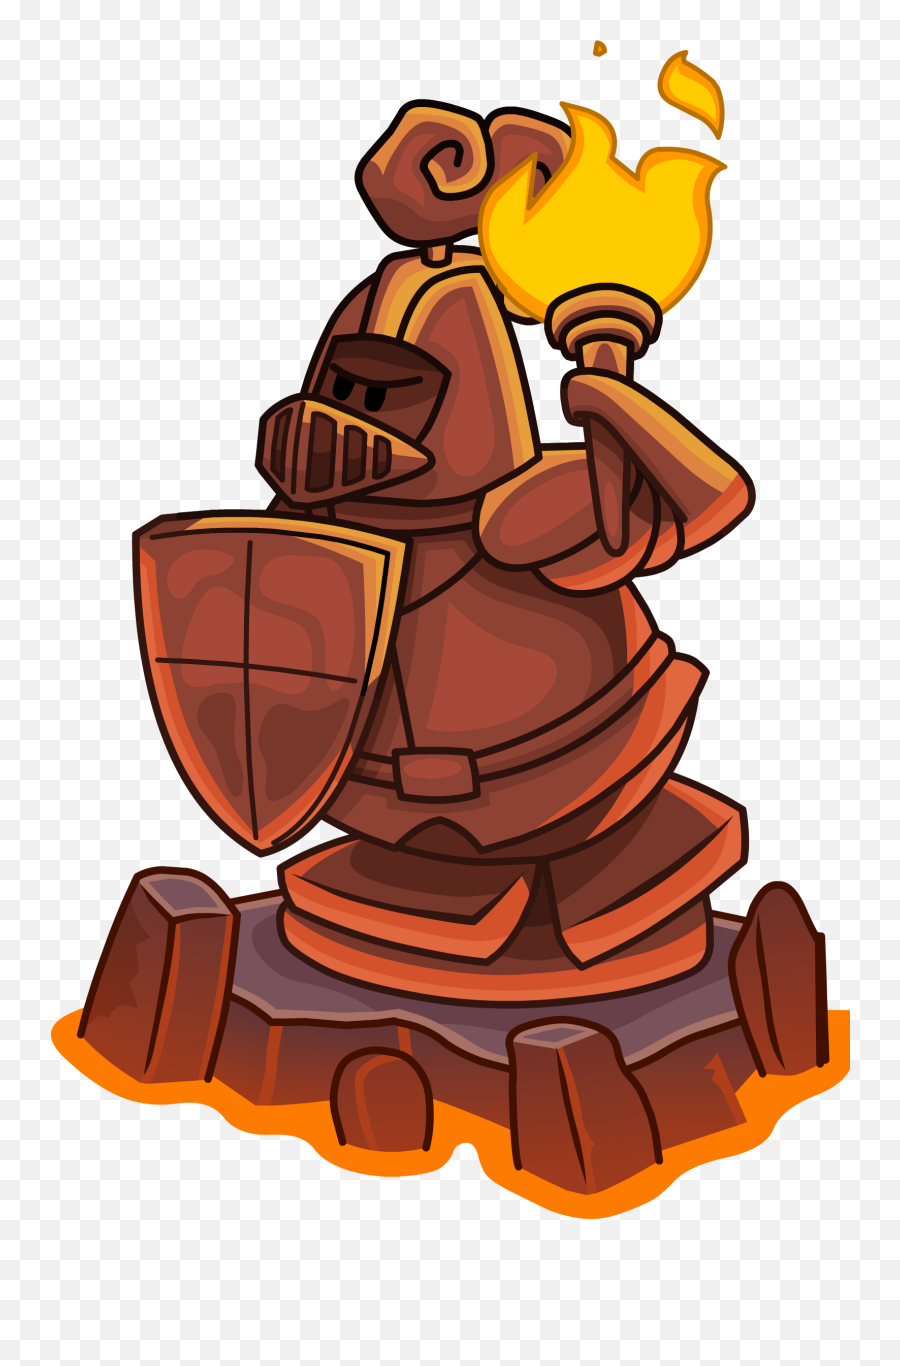 Download Knightu0027s Quest 2 Knight Statue - Knight Full Size Png,Knights Png